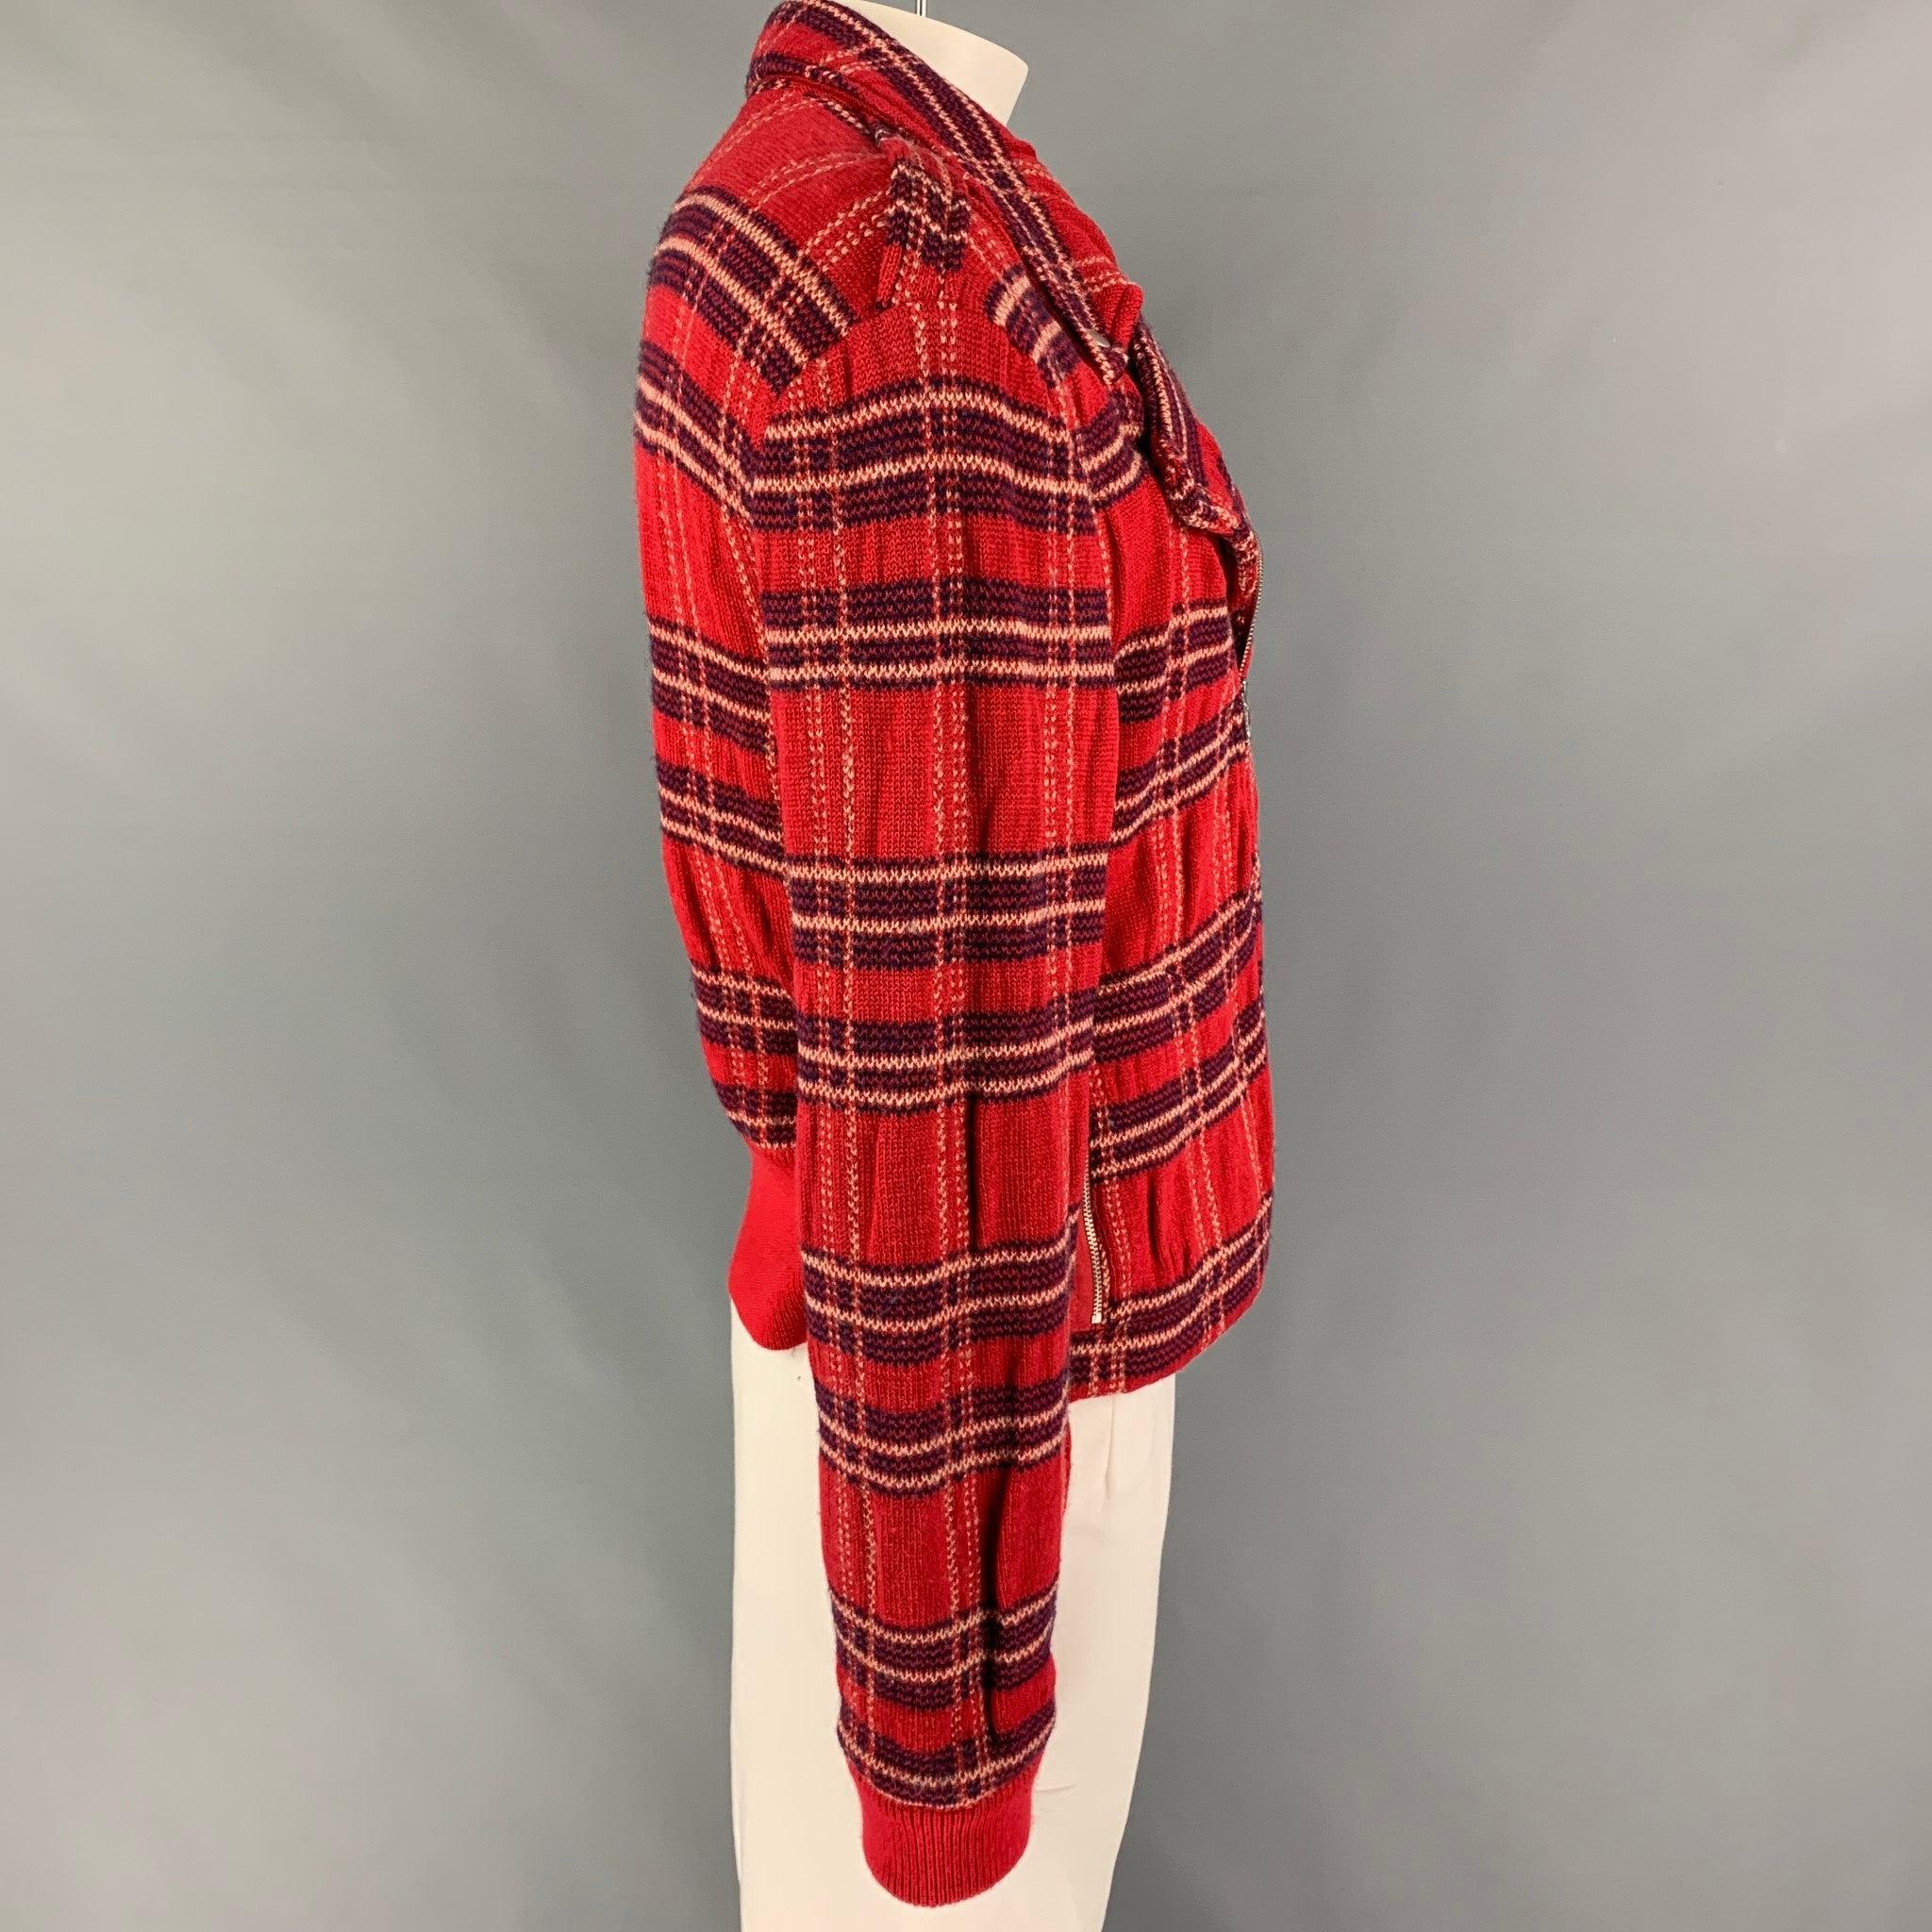 MARC by MARC JACOBS jacket comes in a red & navy knitted plaid wool featuring a biker style, zipper pockets, silver tone hardware, and a zip up closure.
Very Good
Pre-Owned Condition. 

Marked:   XL  

Measurements: 
 
Shoulder: 22 inches  Chest: 44